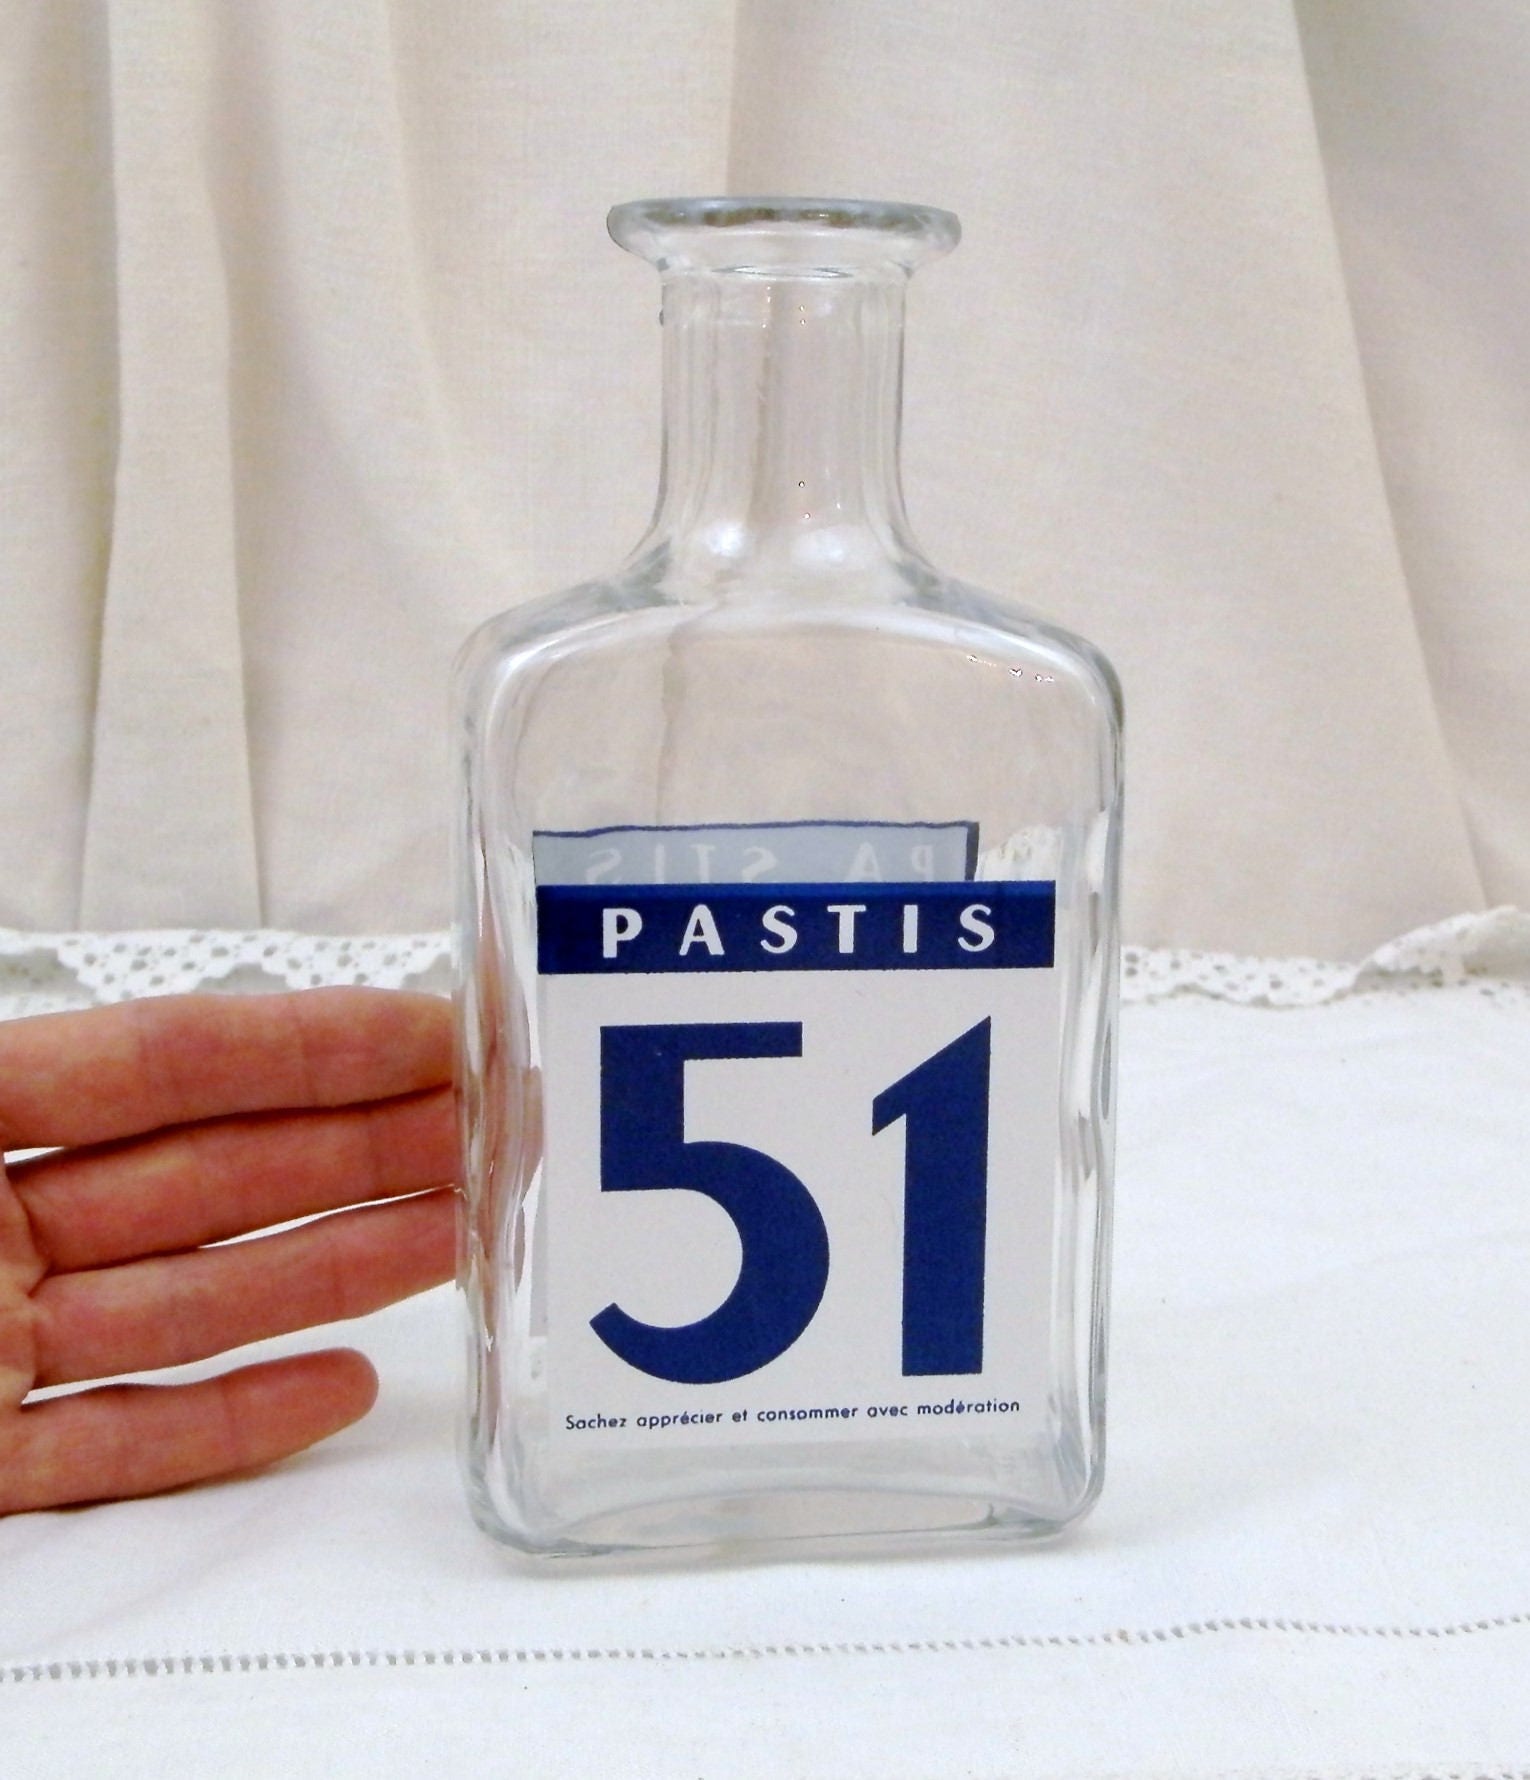 Vintage French Pastis 51 Aniseed Aperitif Drink Water Carafe / Bottle,  South of France Cote D'Azur Drinks, Ricard Pernod, Retro Home